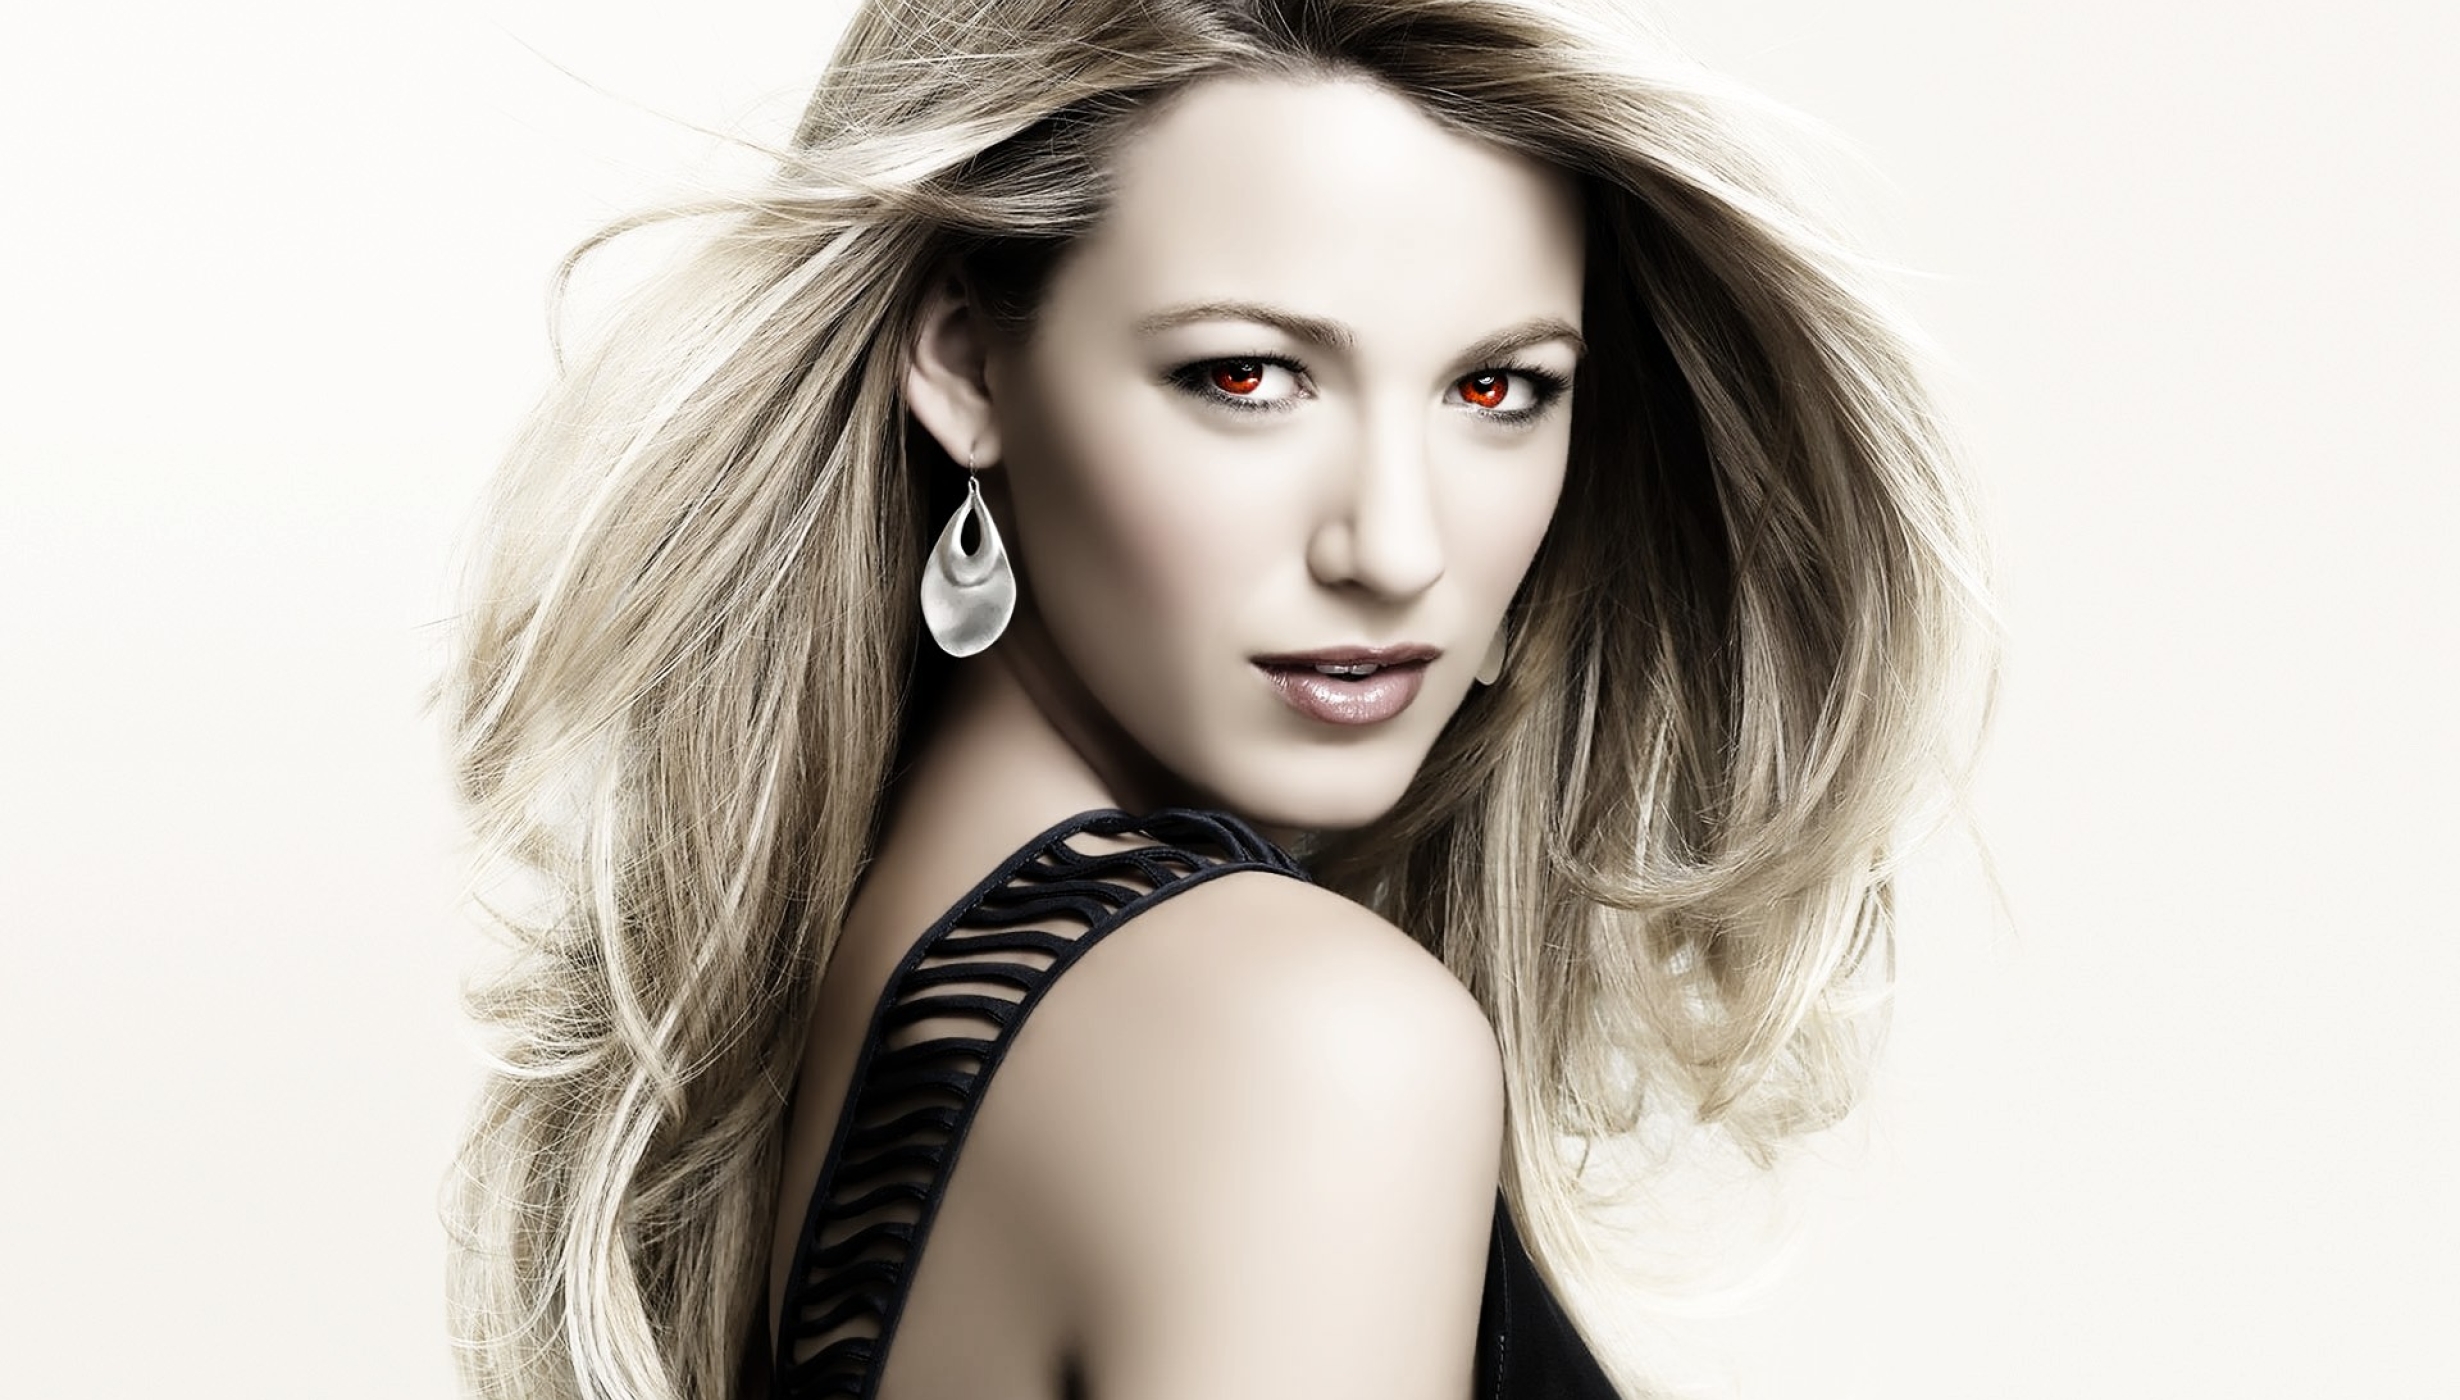 2460x1400 Blake Lively Hd Photo Gallery 2460x1400 Resolution Wallpaper